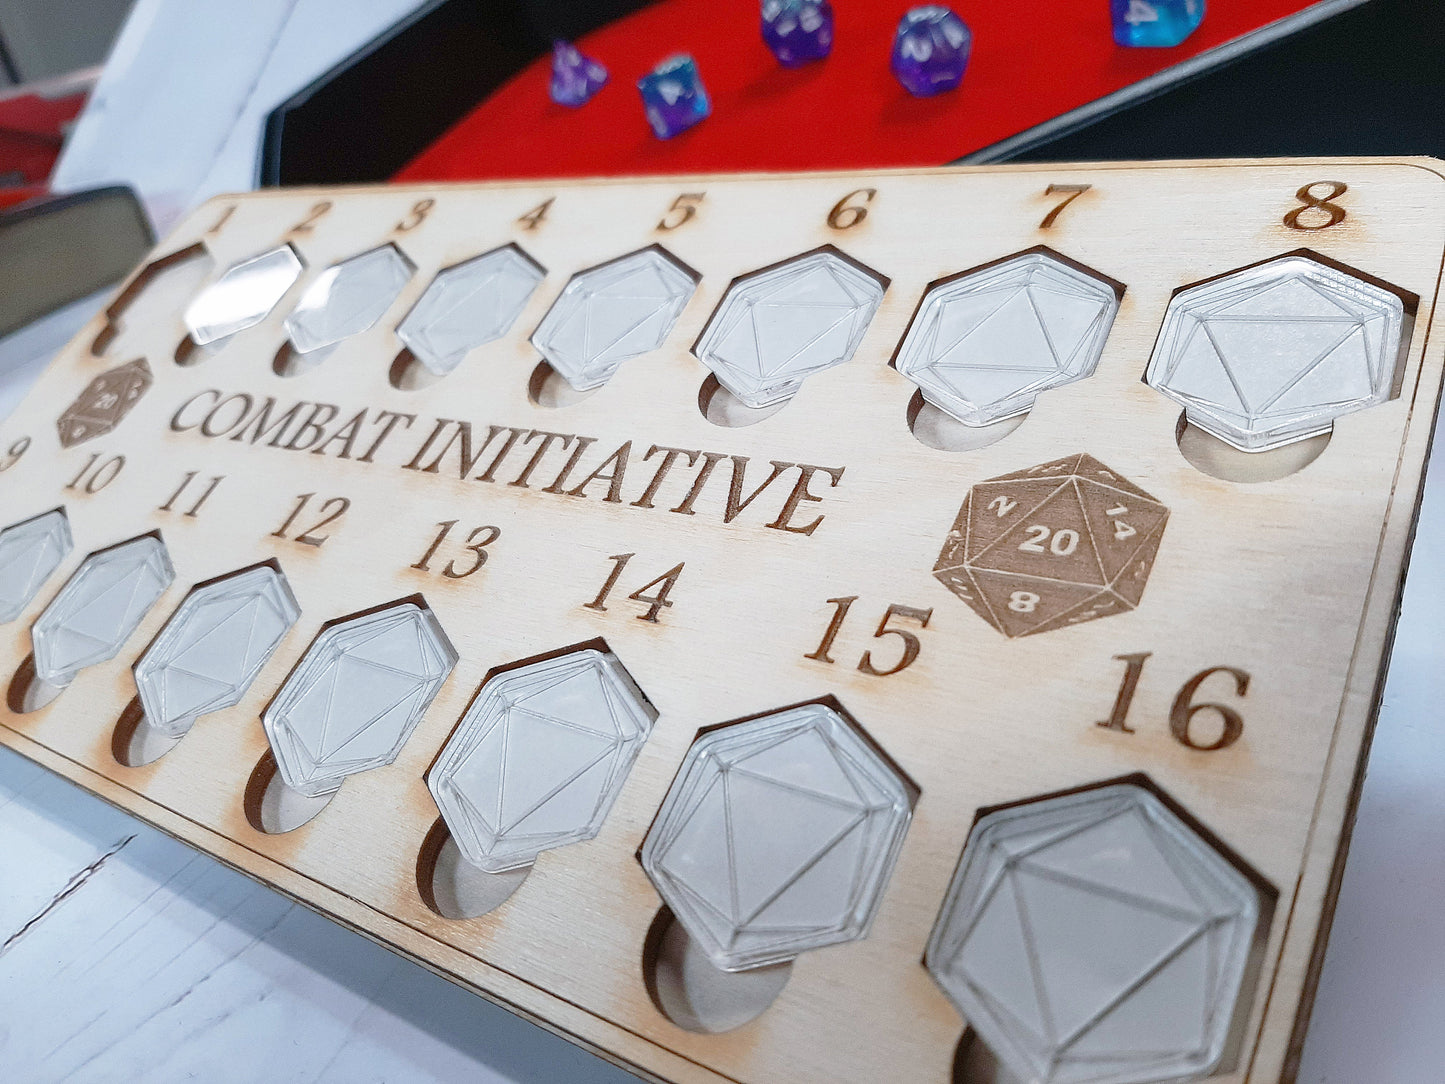 Initiative Tracker 16 - Tabletop - for D&D and Other Tabletop RPG Games